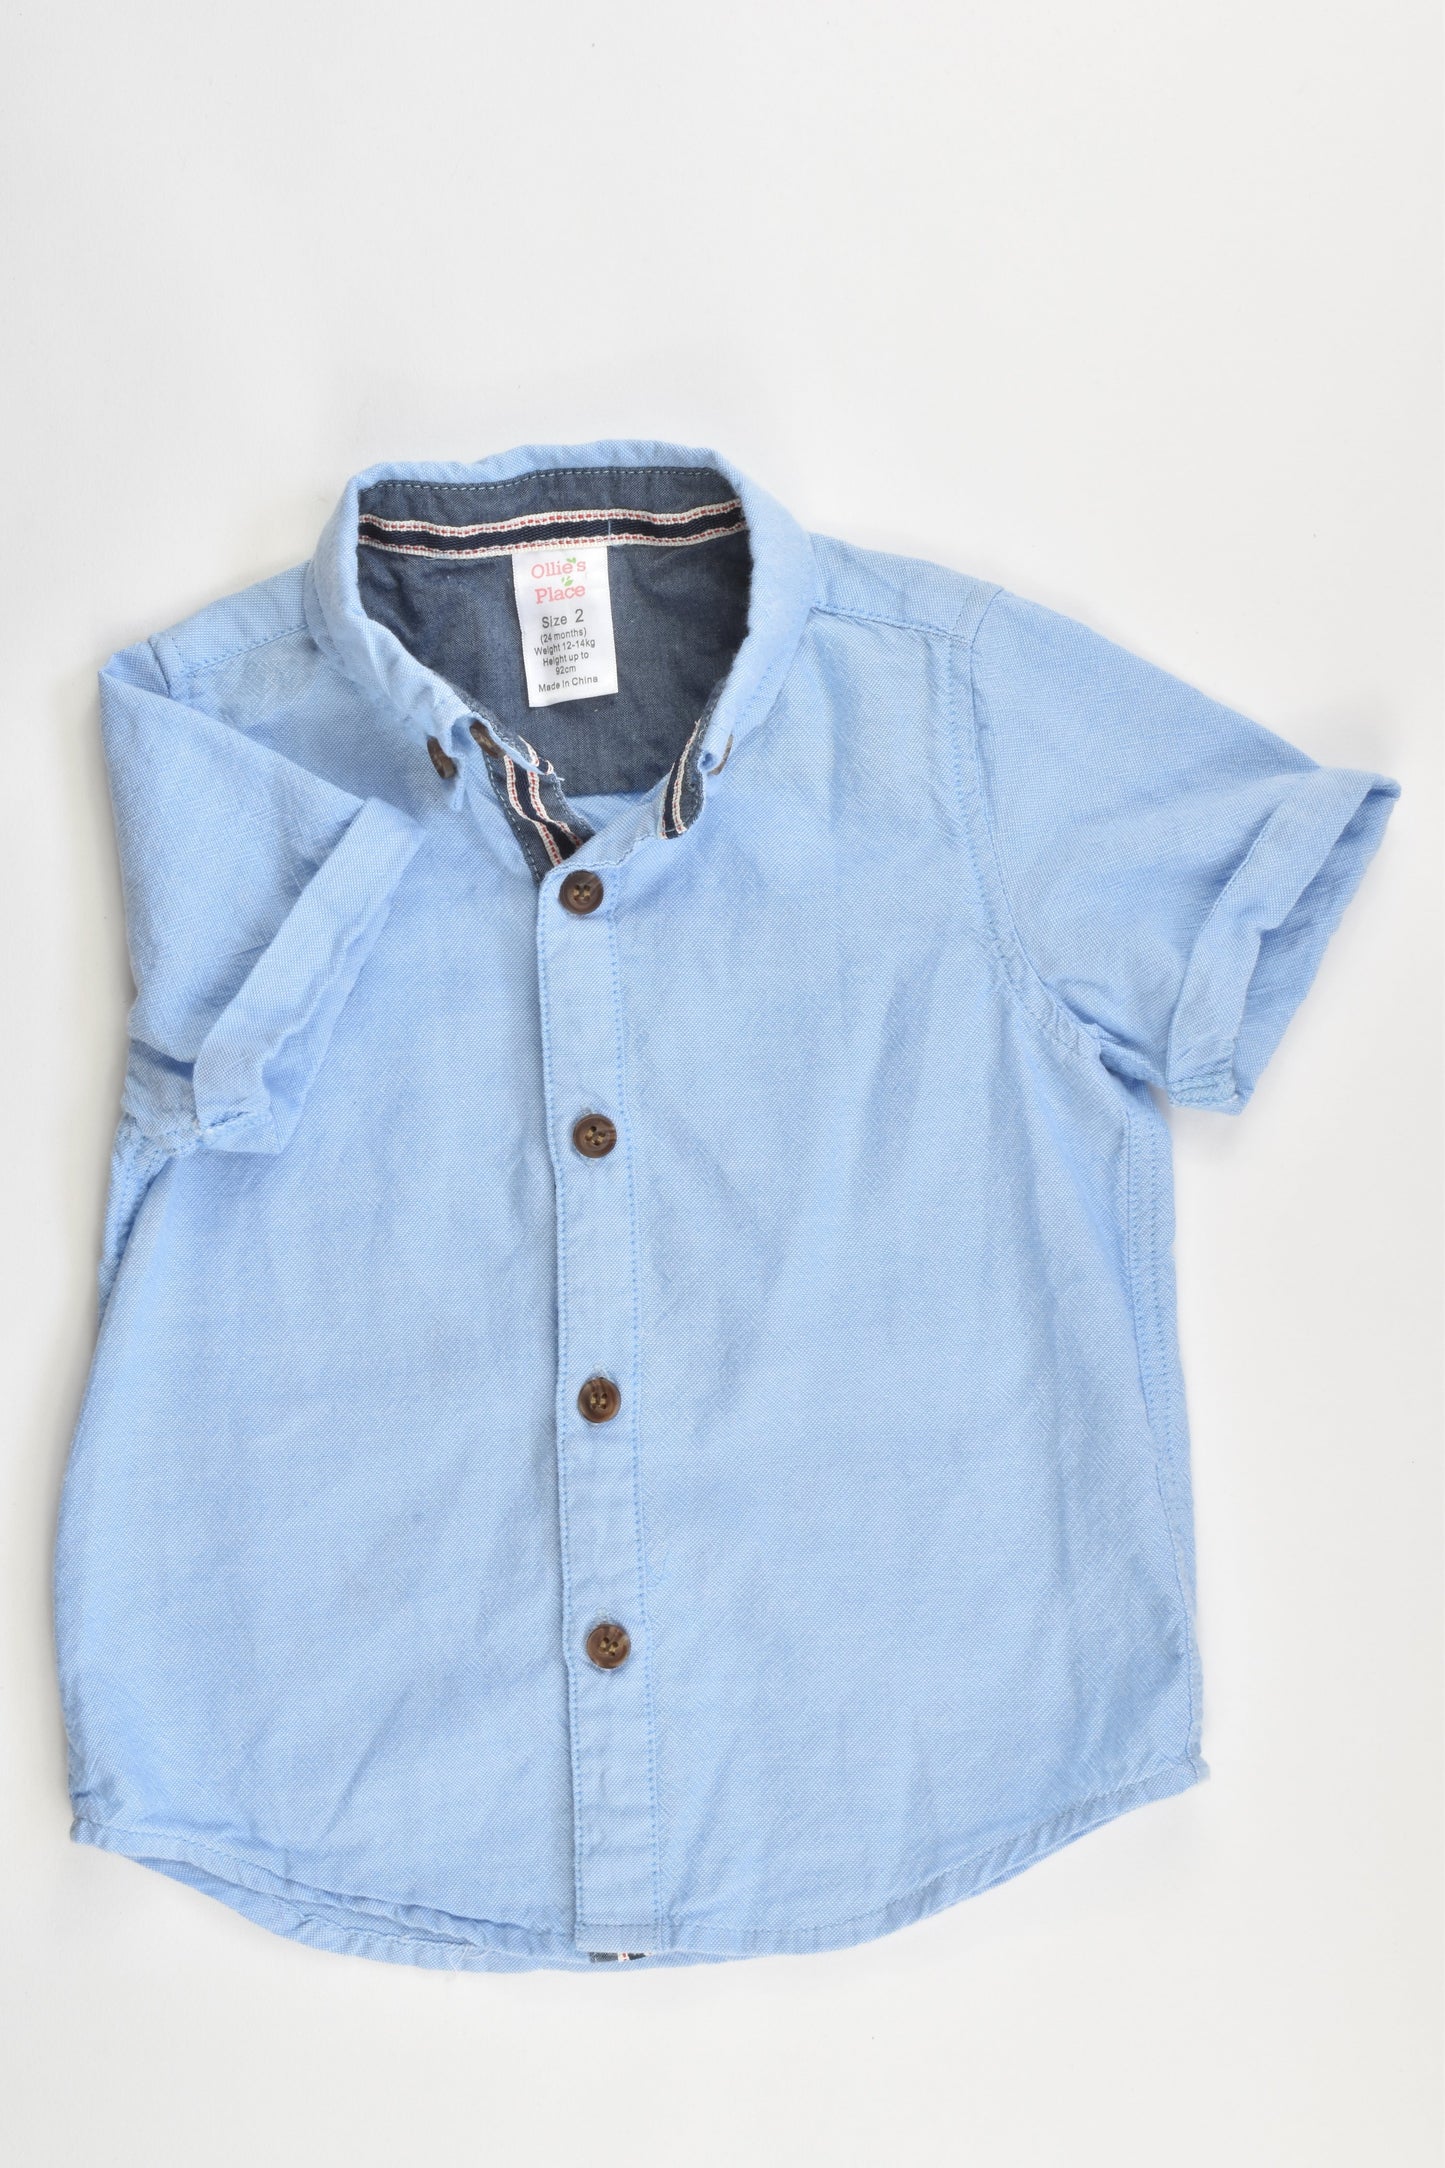 Ollie's Place Size 2 Collared Shirt